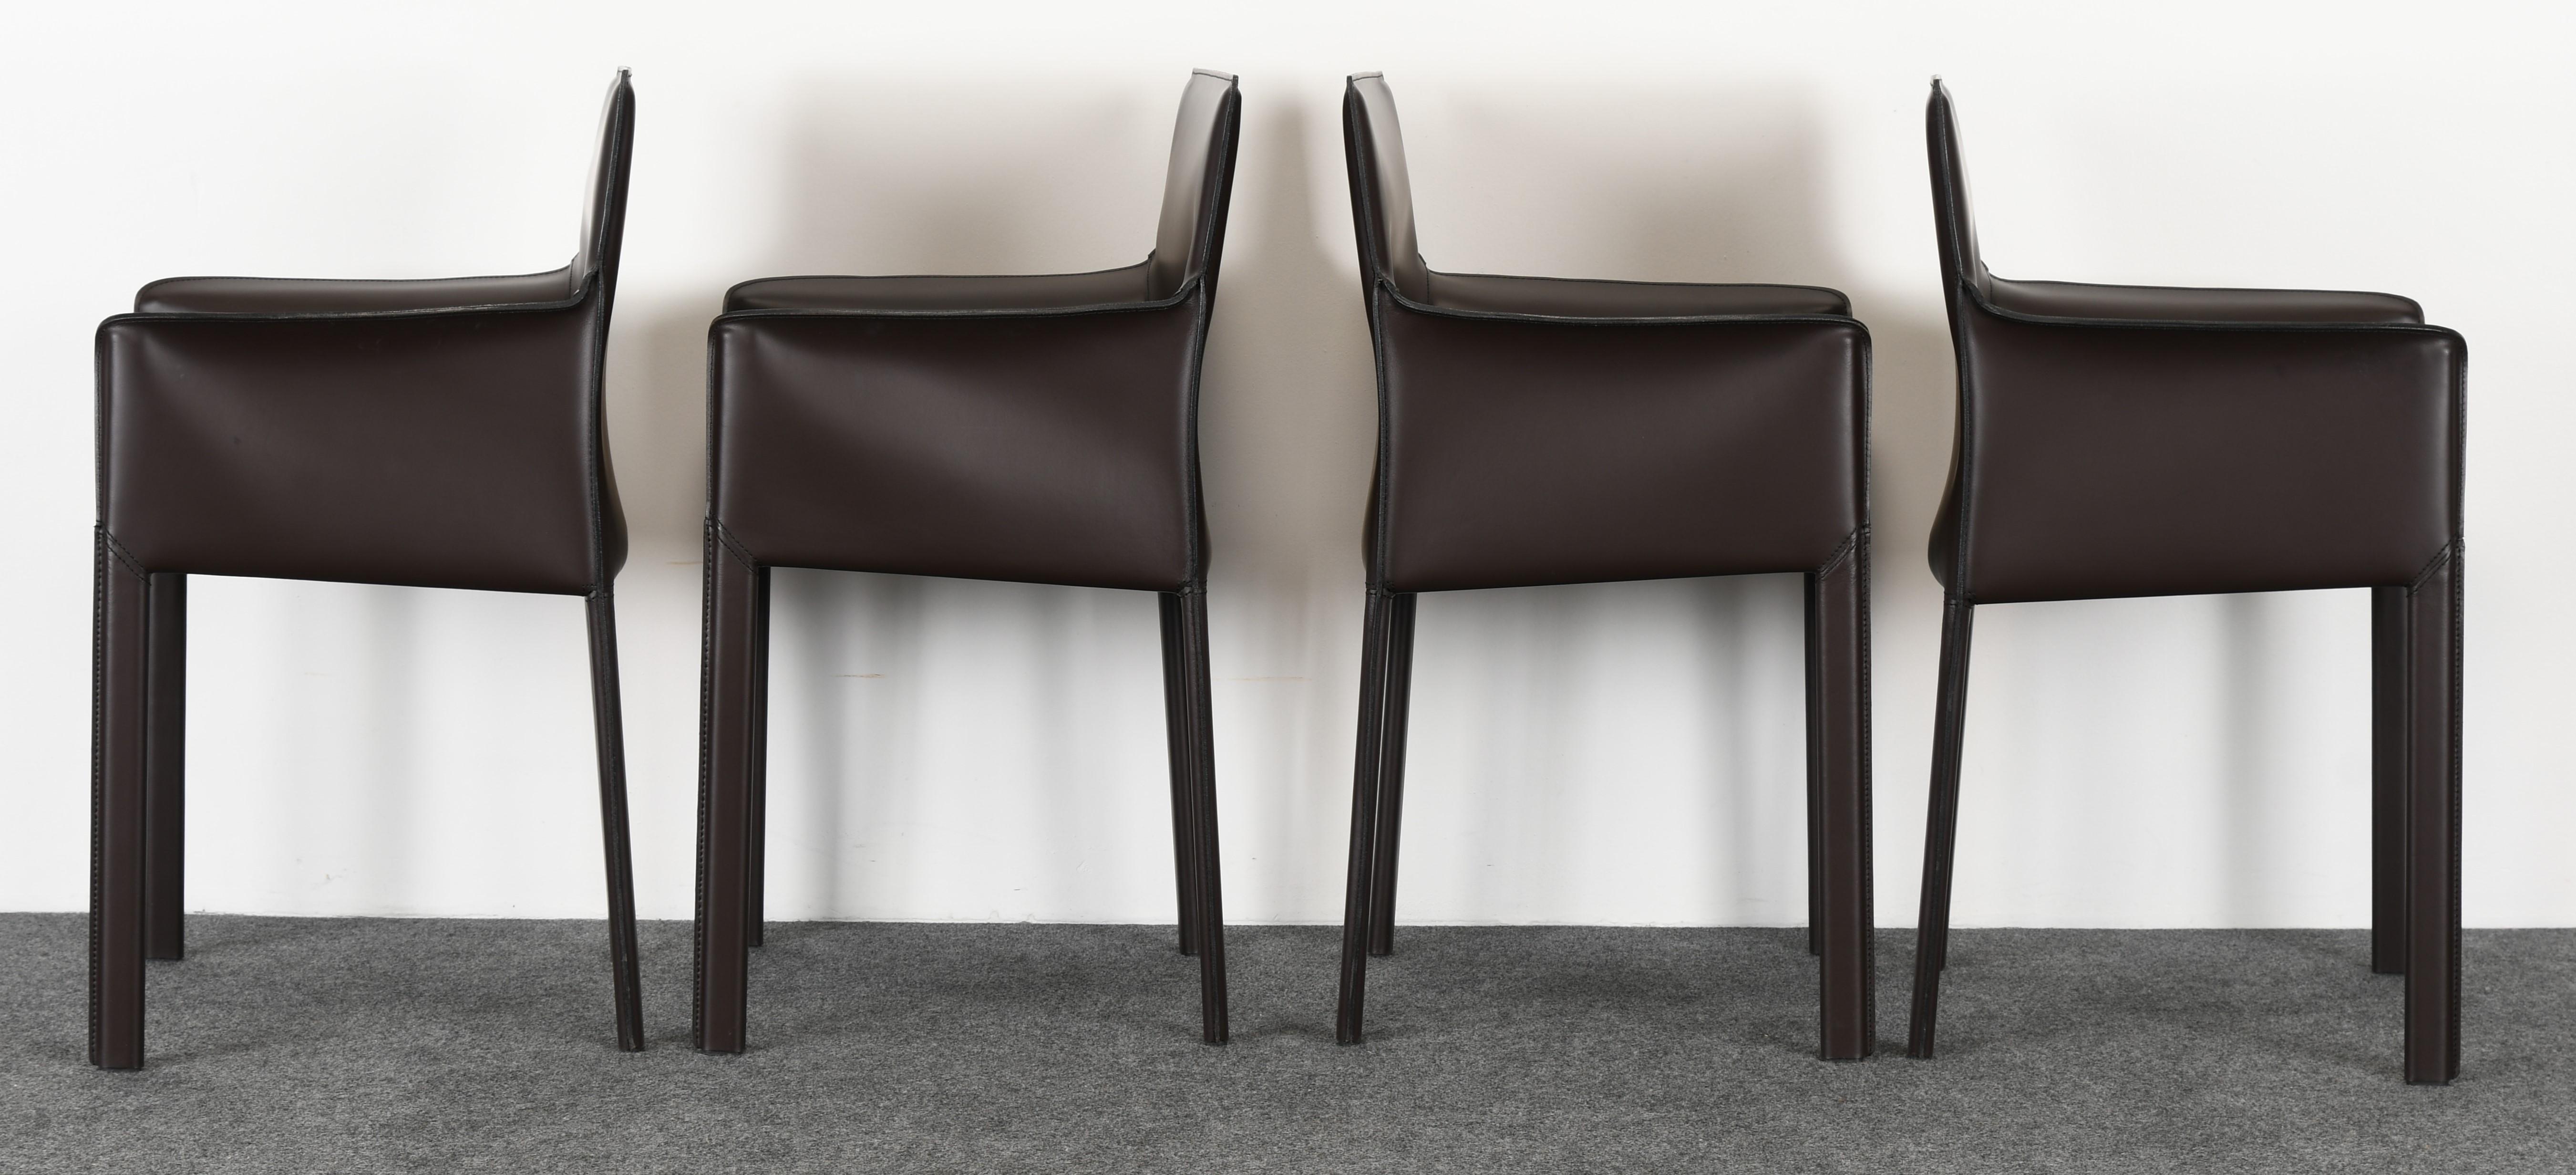 20th Century Four Leather Dining Chairs by Enrico Pellizzoni, 2000s